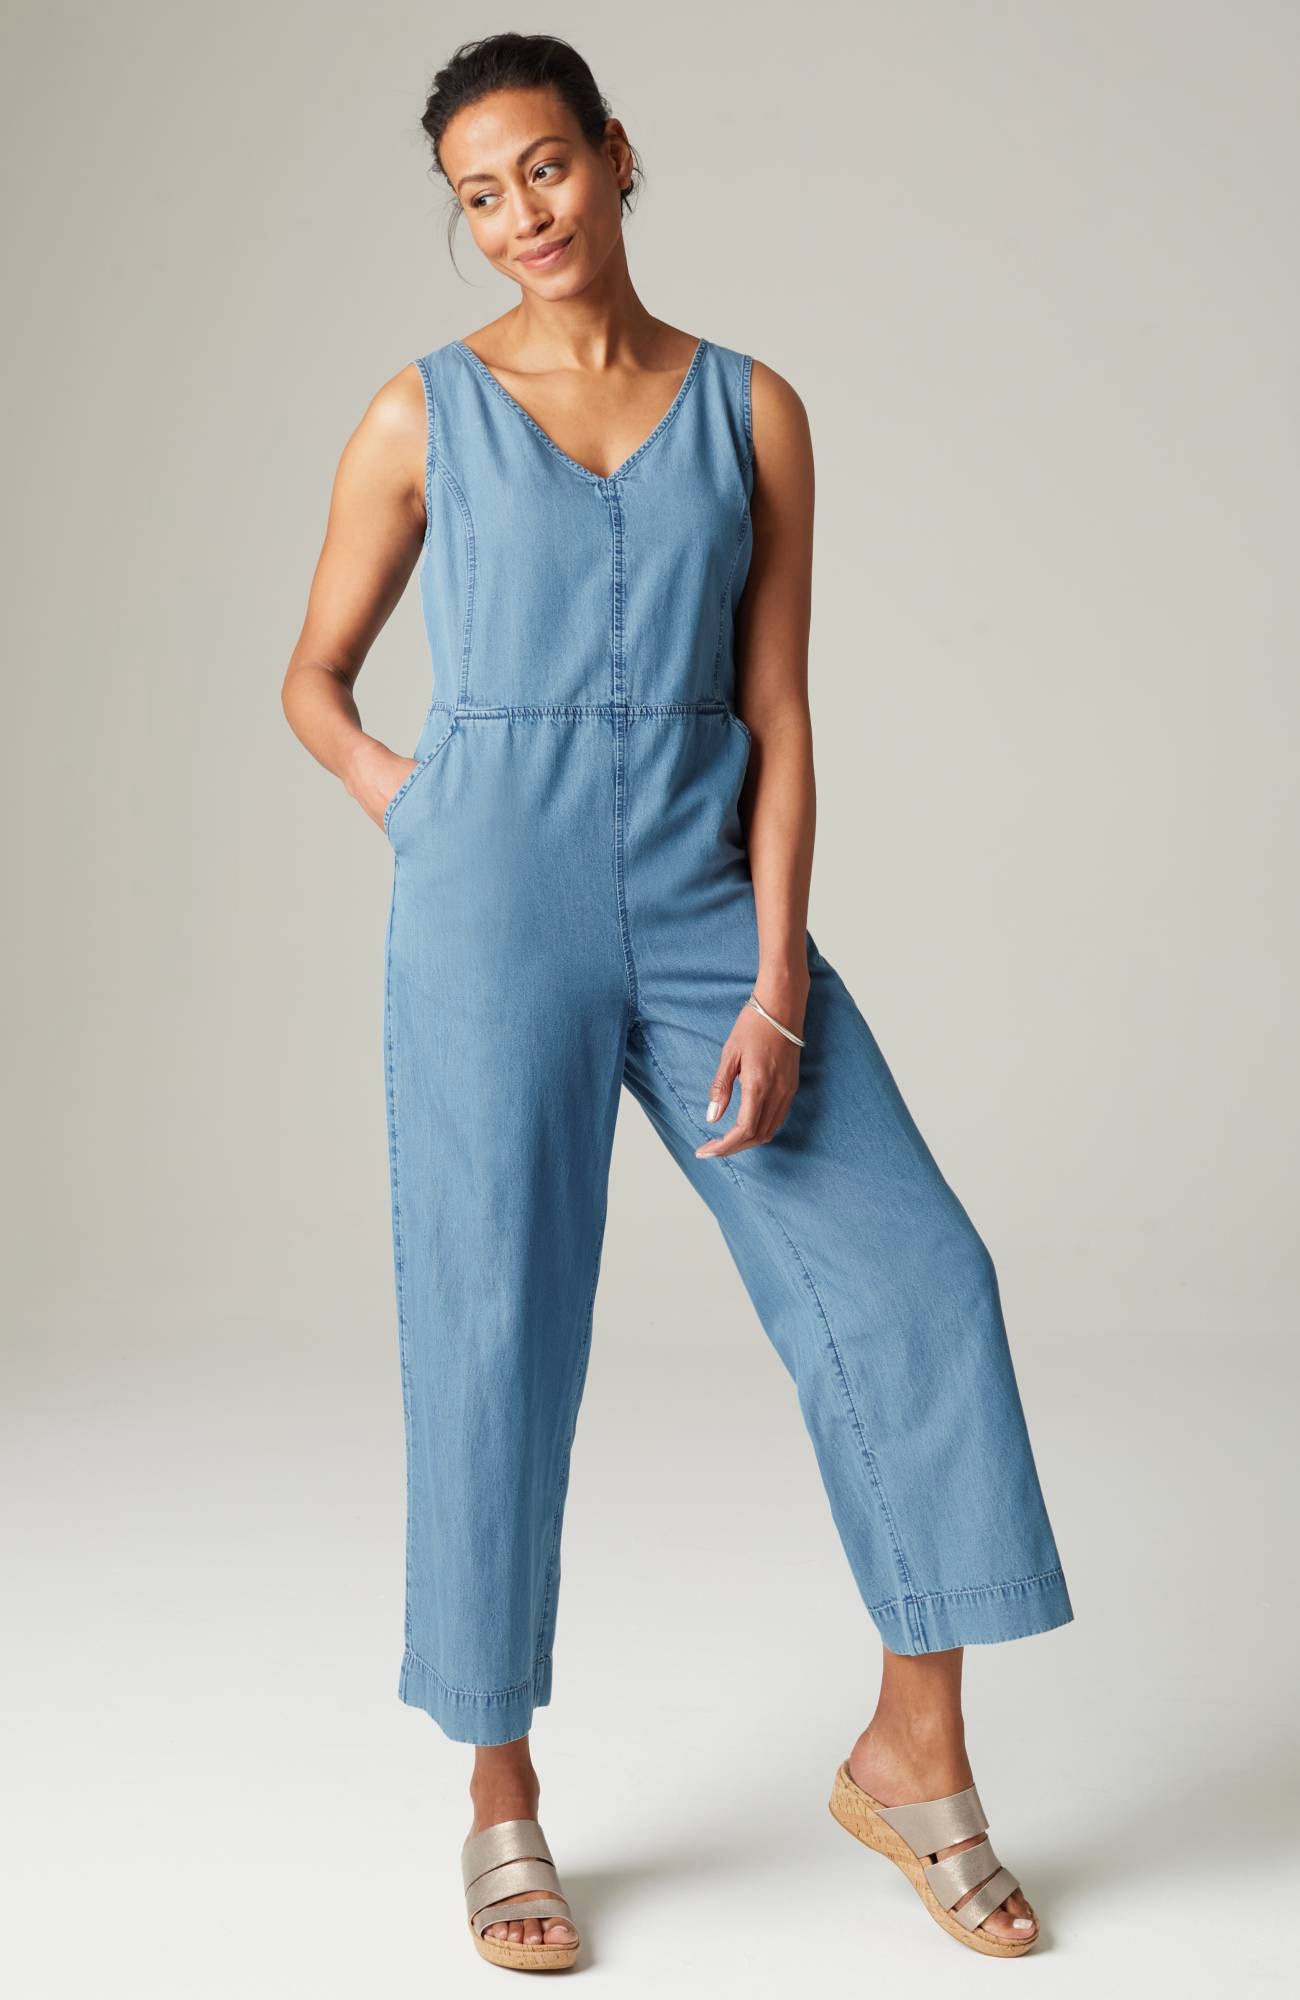 Obsessed with this Denim Cargo Jumpsuit 🙌🏼 Launching tonight at 5:00 EST  | Instagram